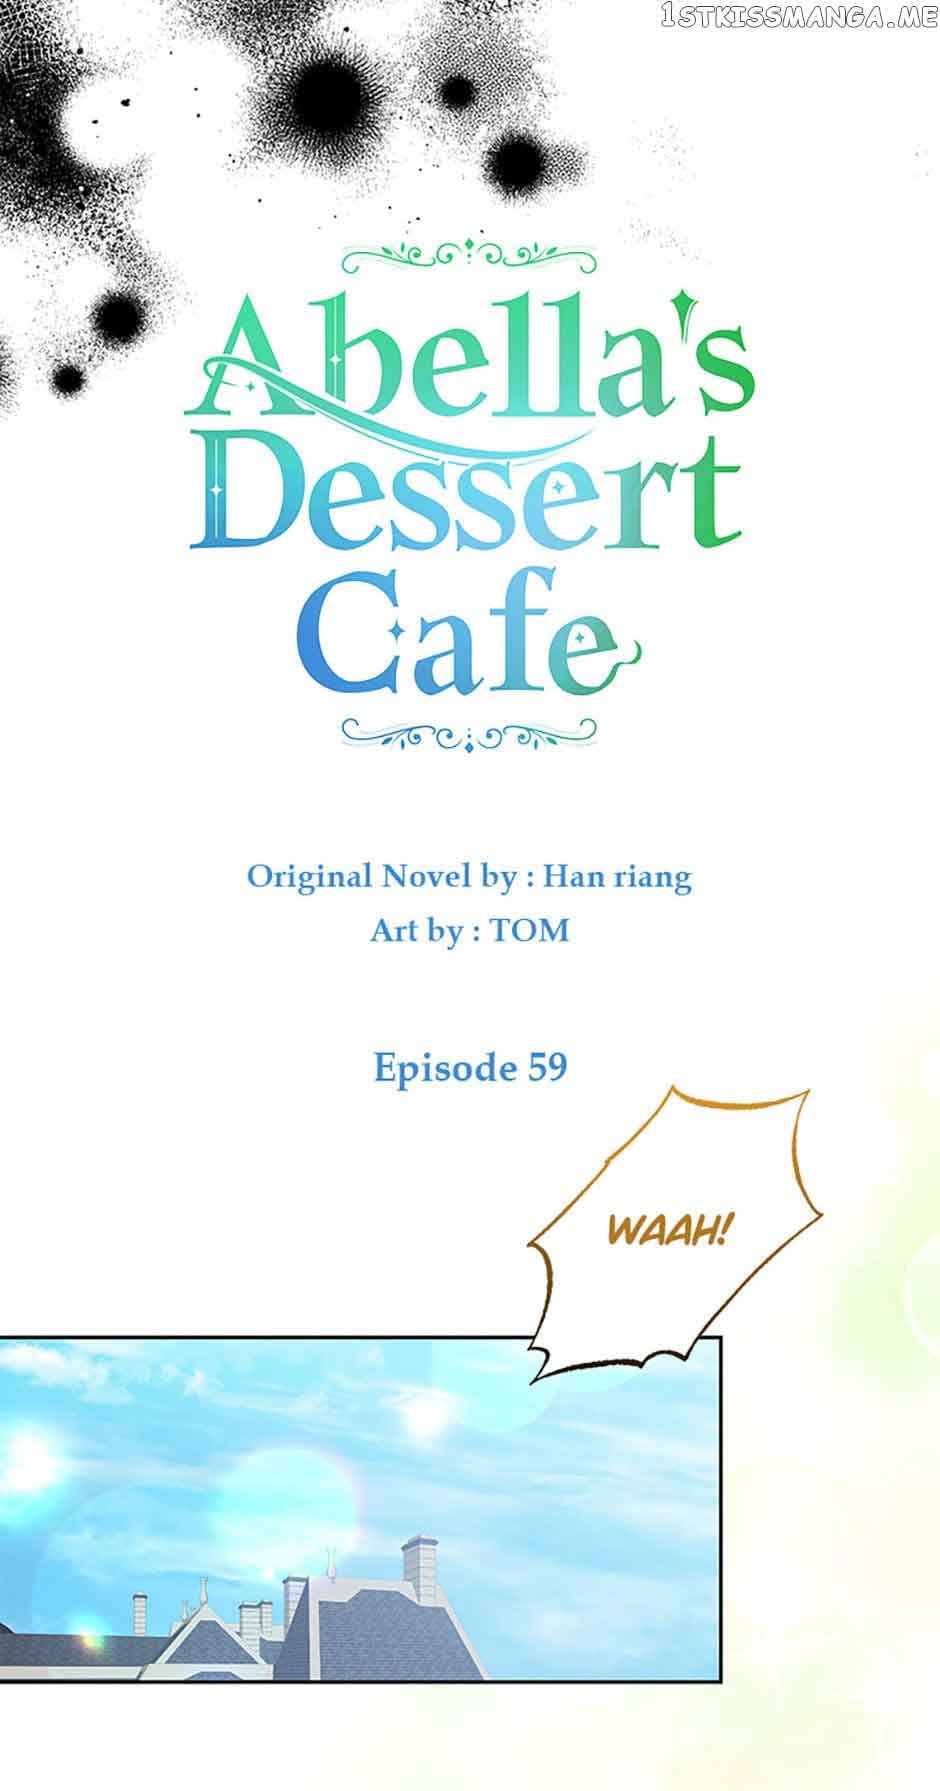 She came back and opened a dessert shop chapter 59